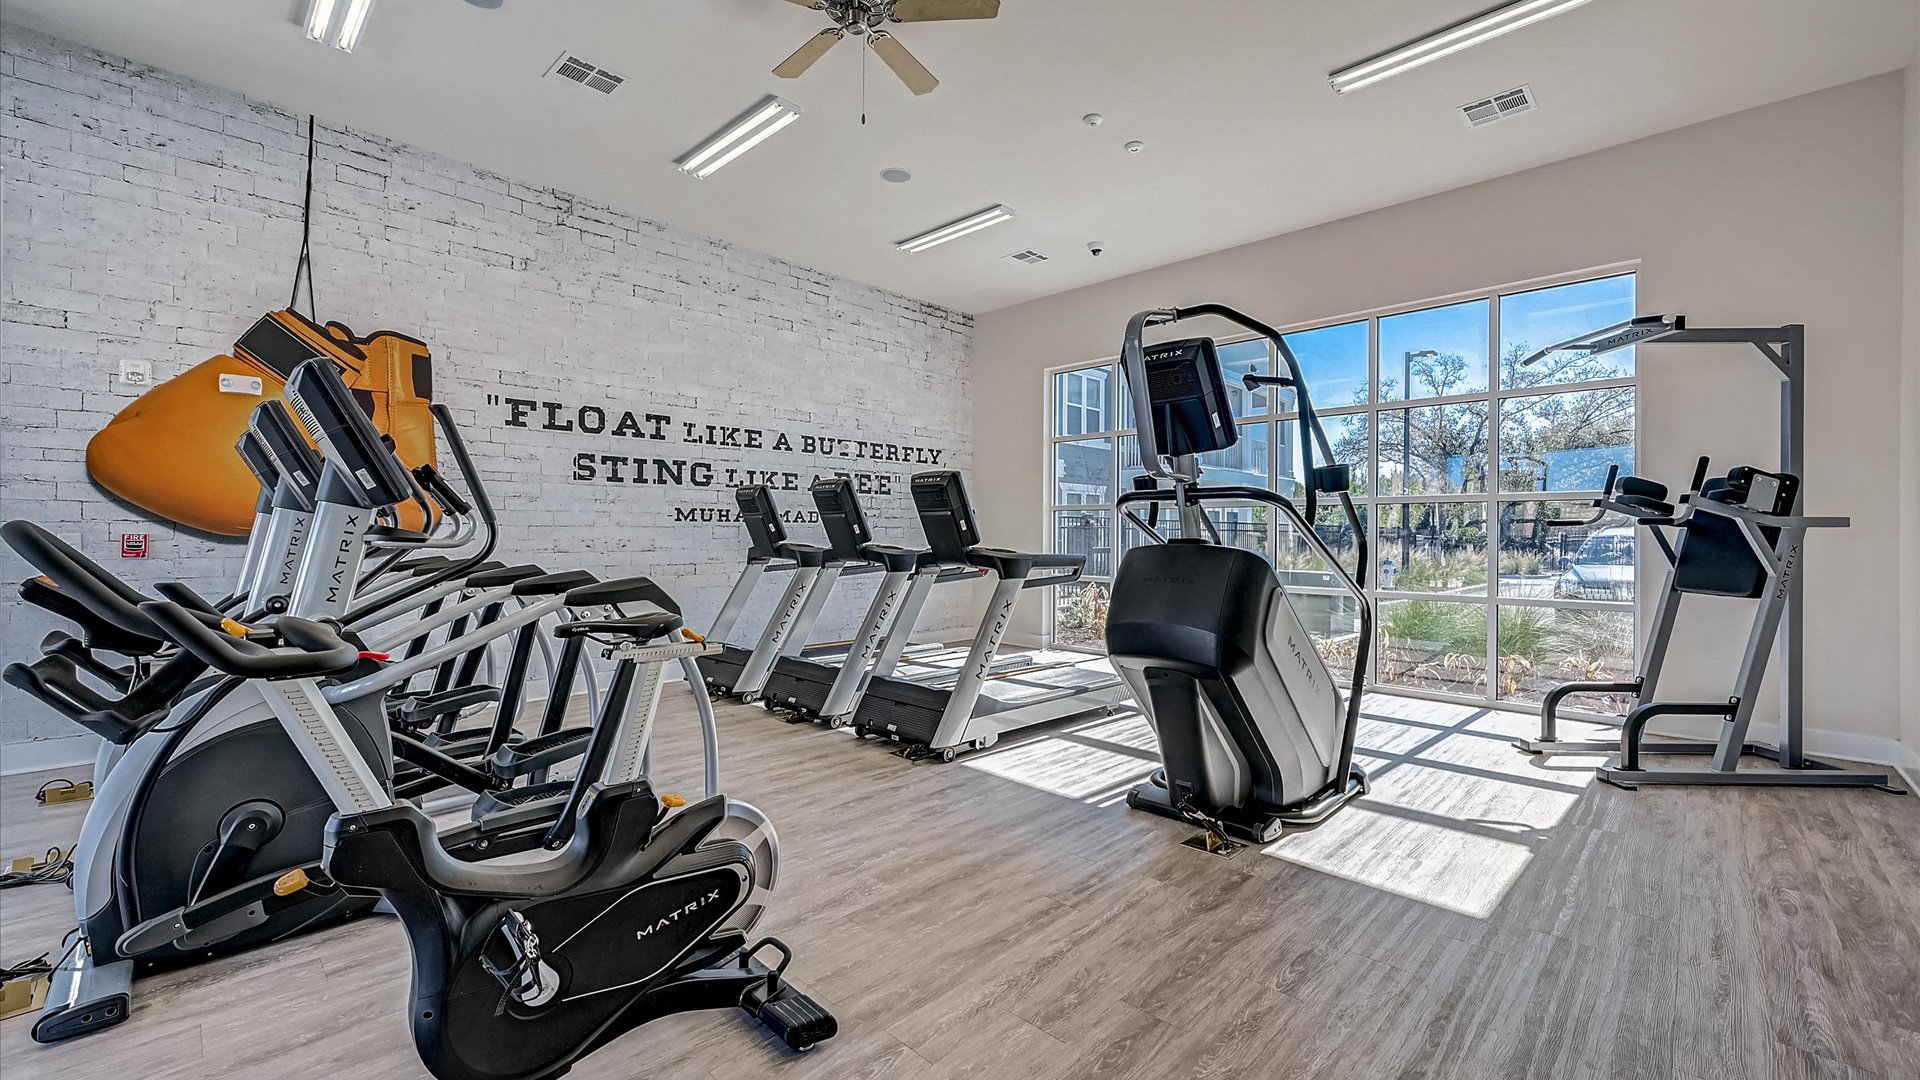 Free Weights in the Convenient Gym Amenity with Graphic wall saying 